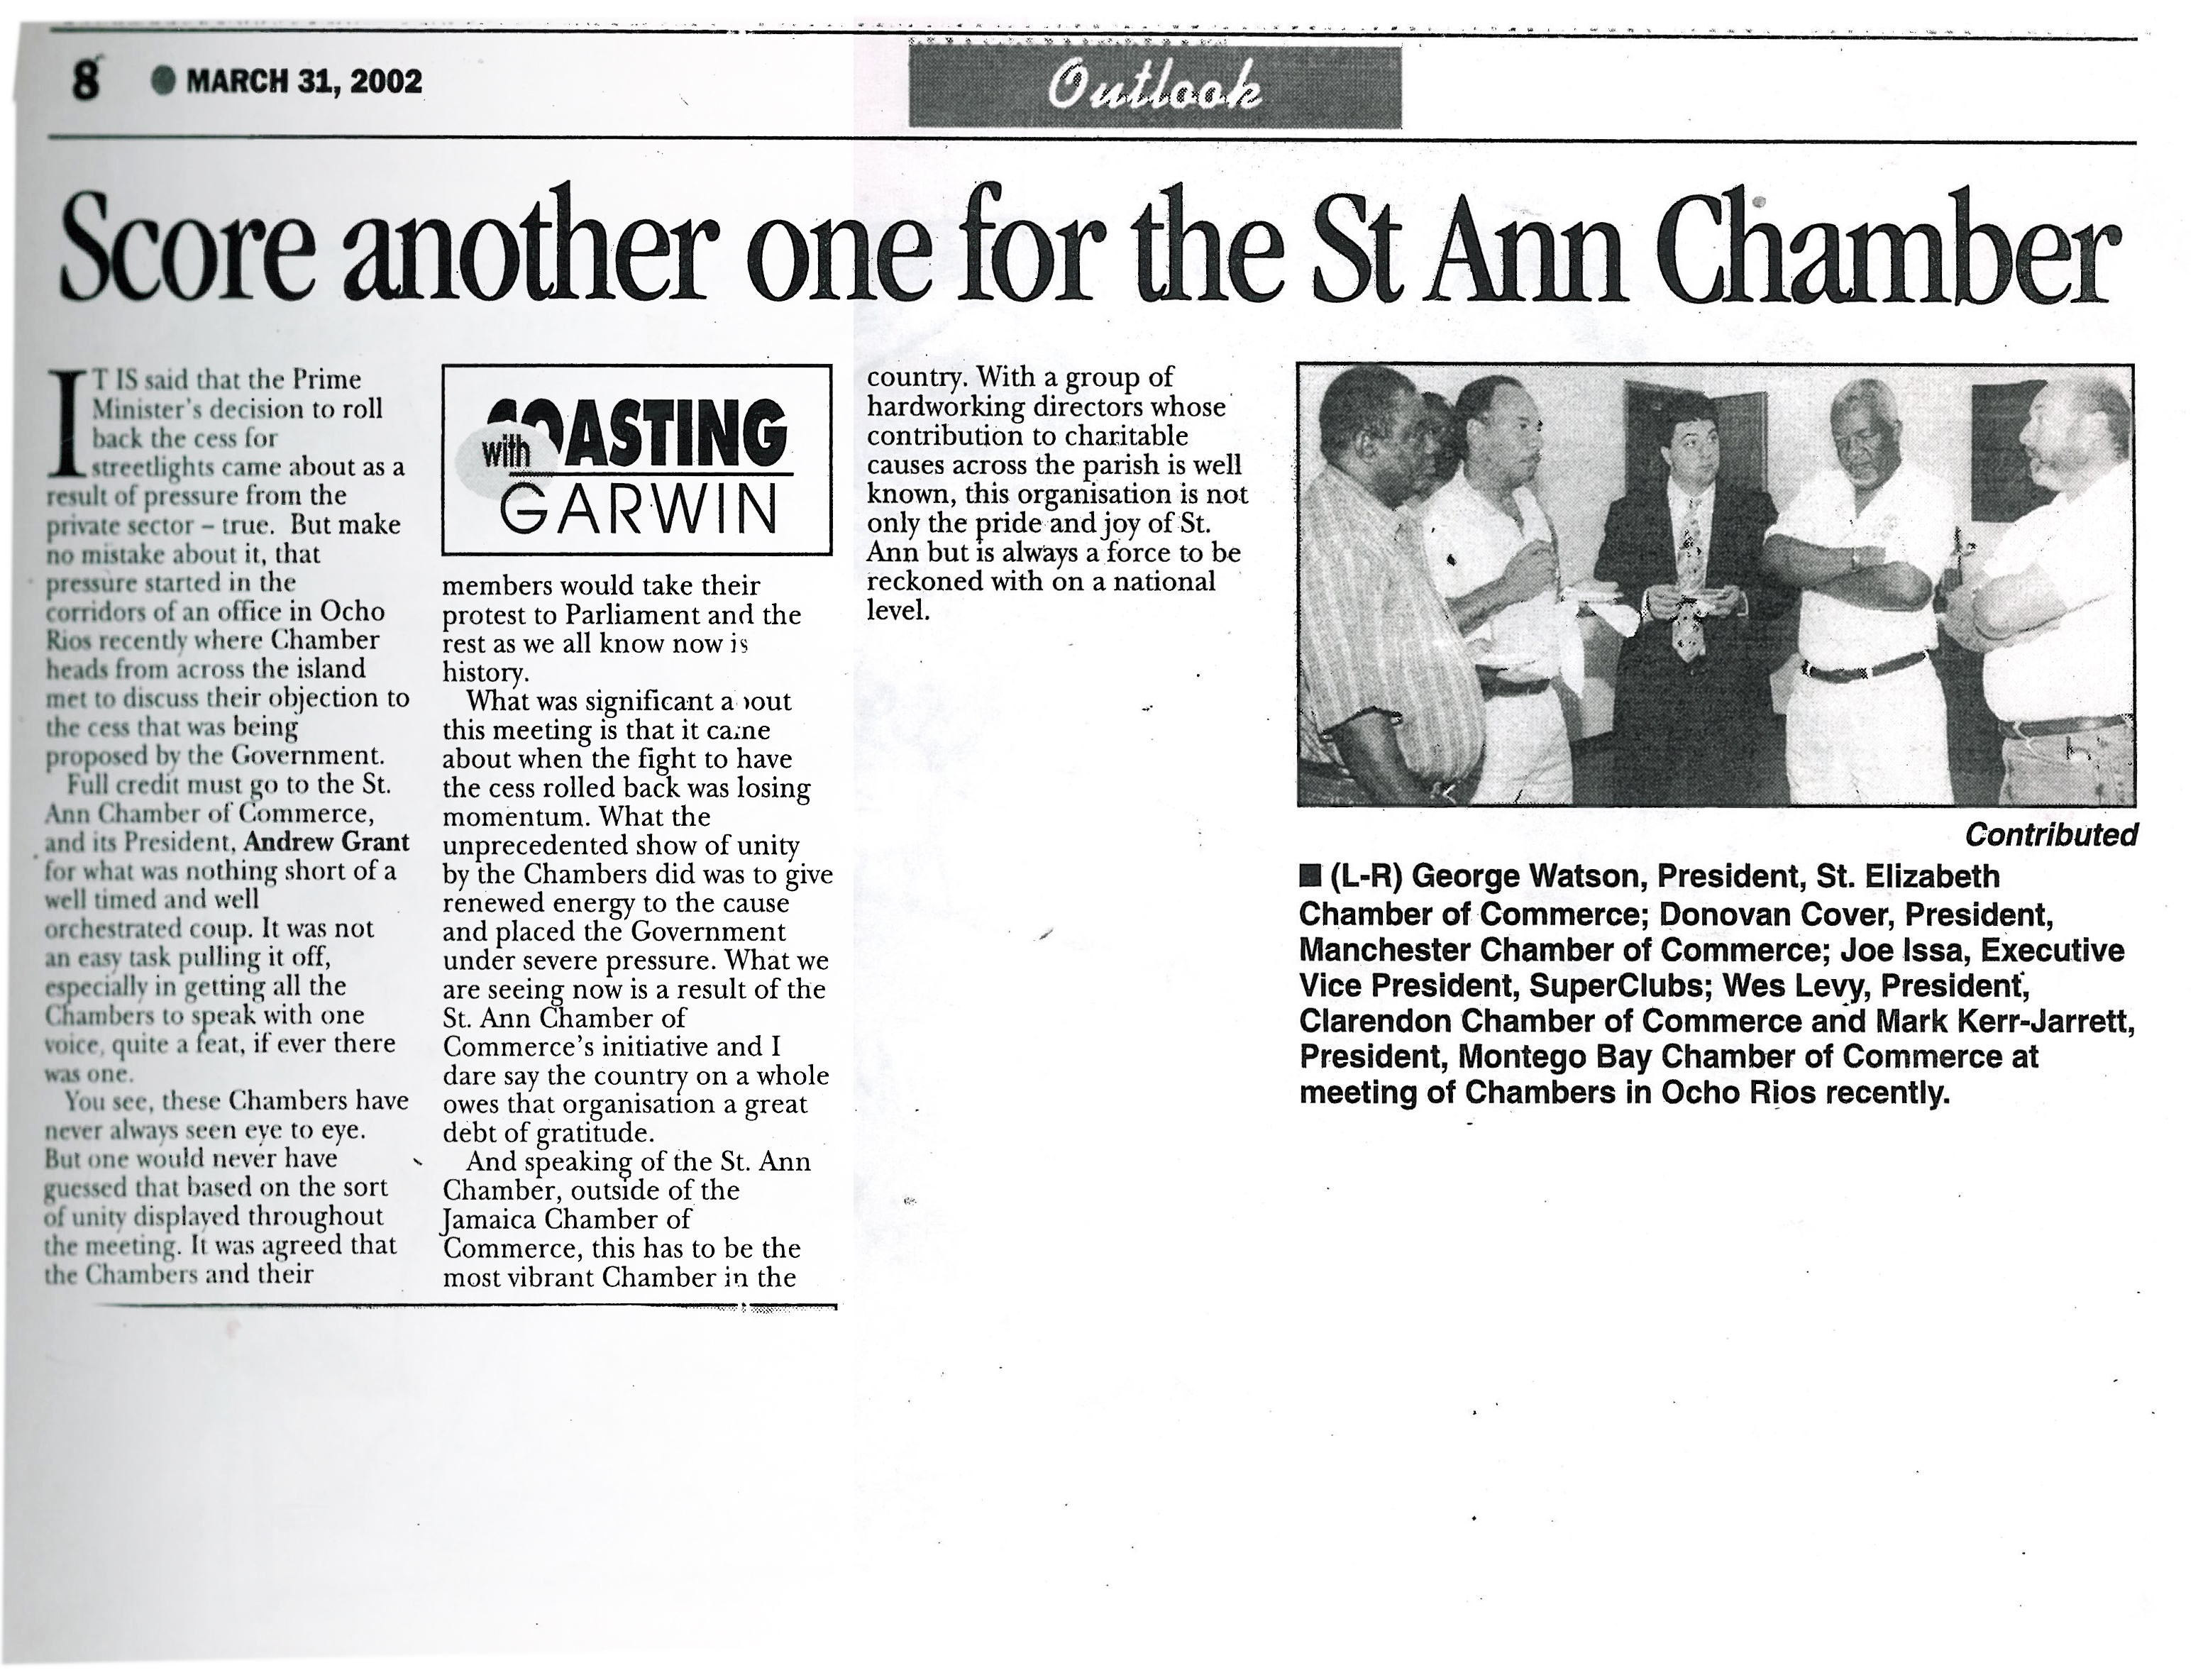 Score another one for the St Ann Chamber